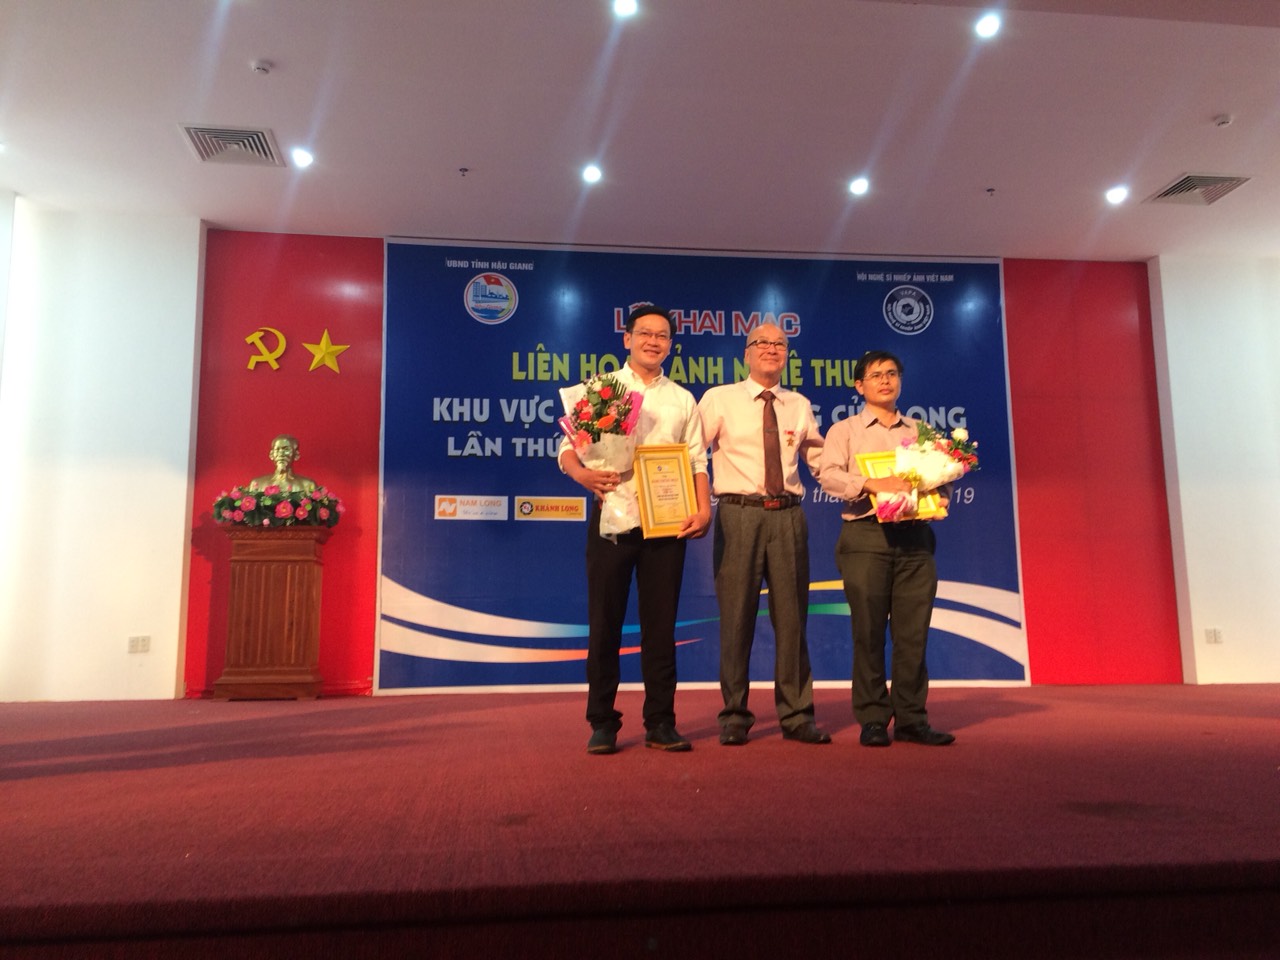 Author Nguyen Minh Nguyen (left cover) received the Festival's consolation prize.